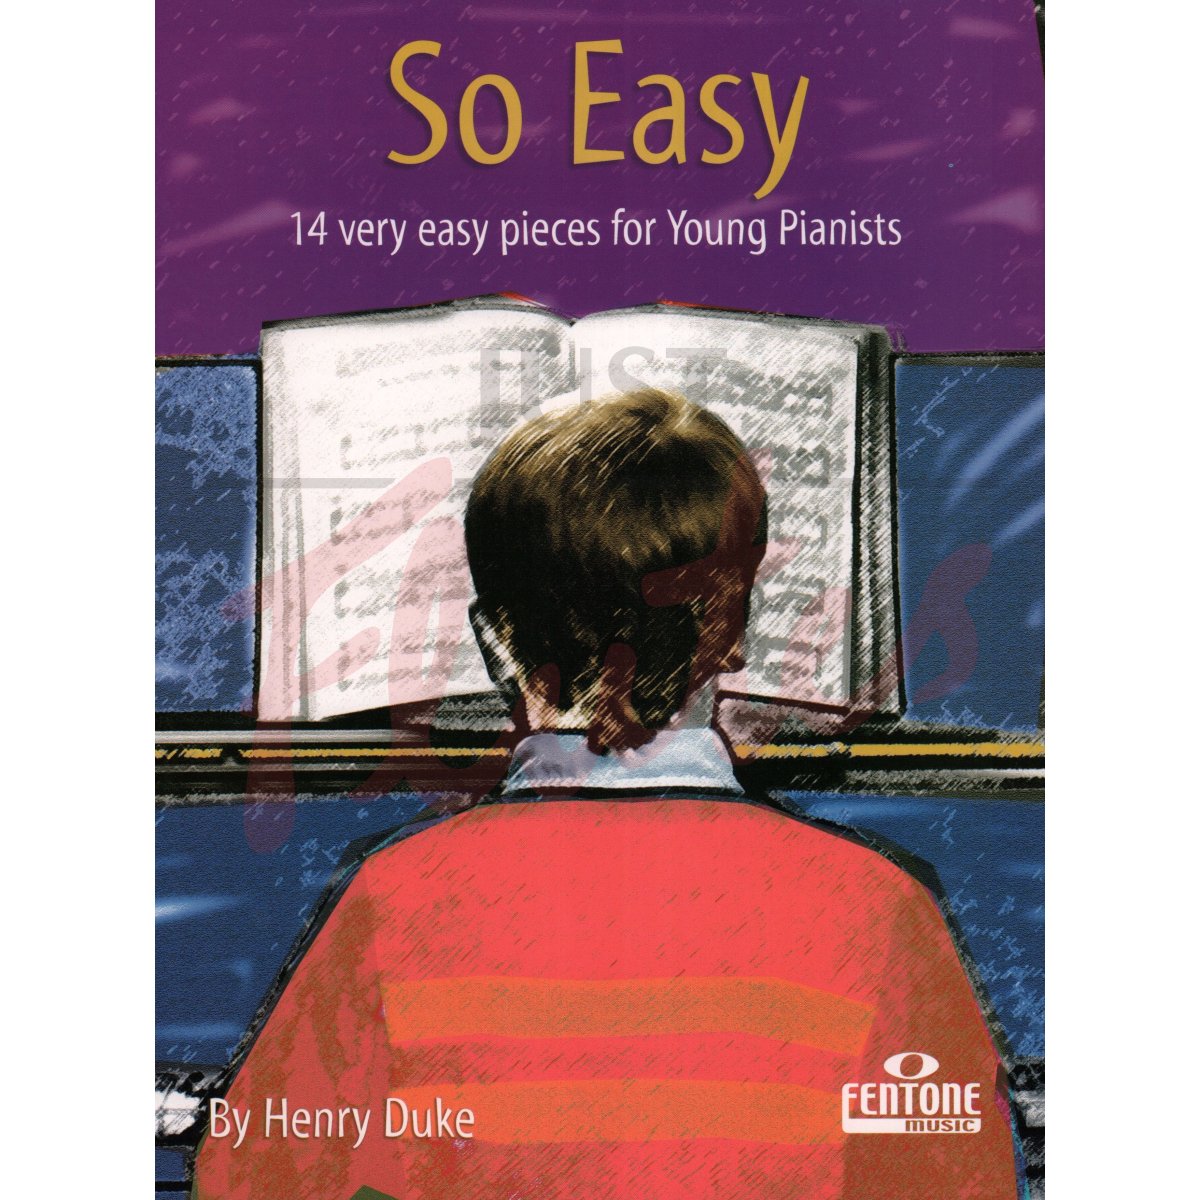 So Easy: 14 Very Easy Pieces for Young Pianists